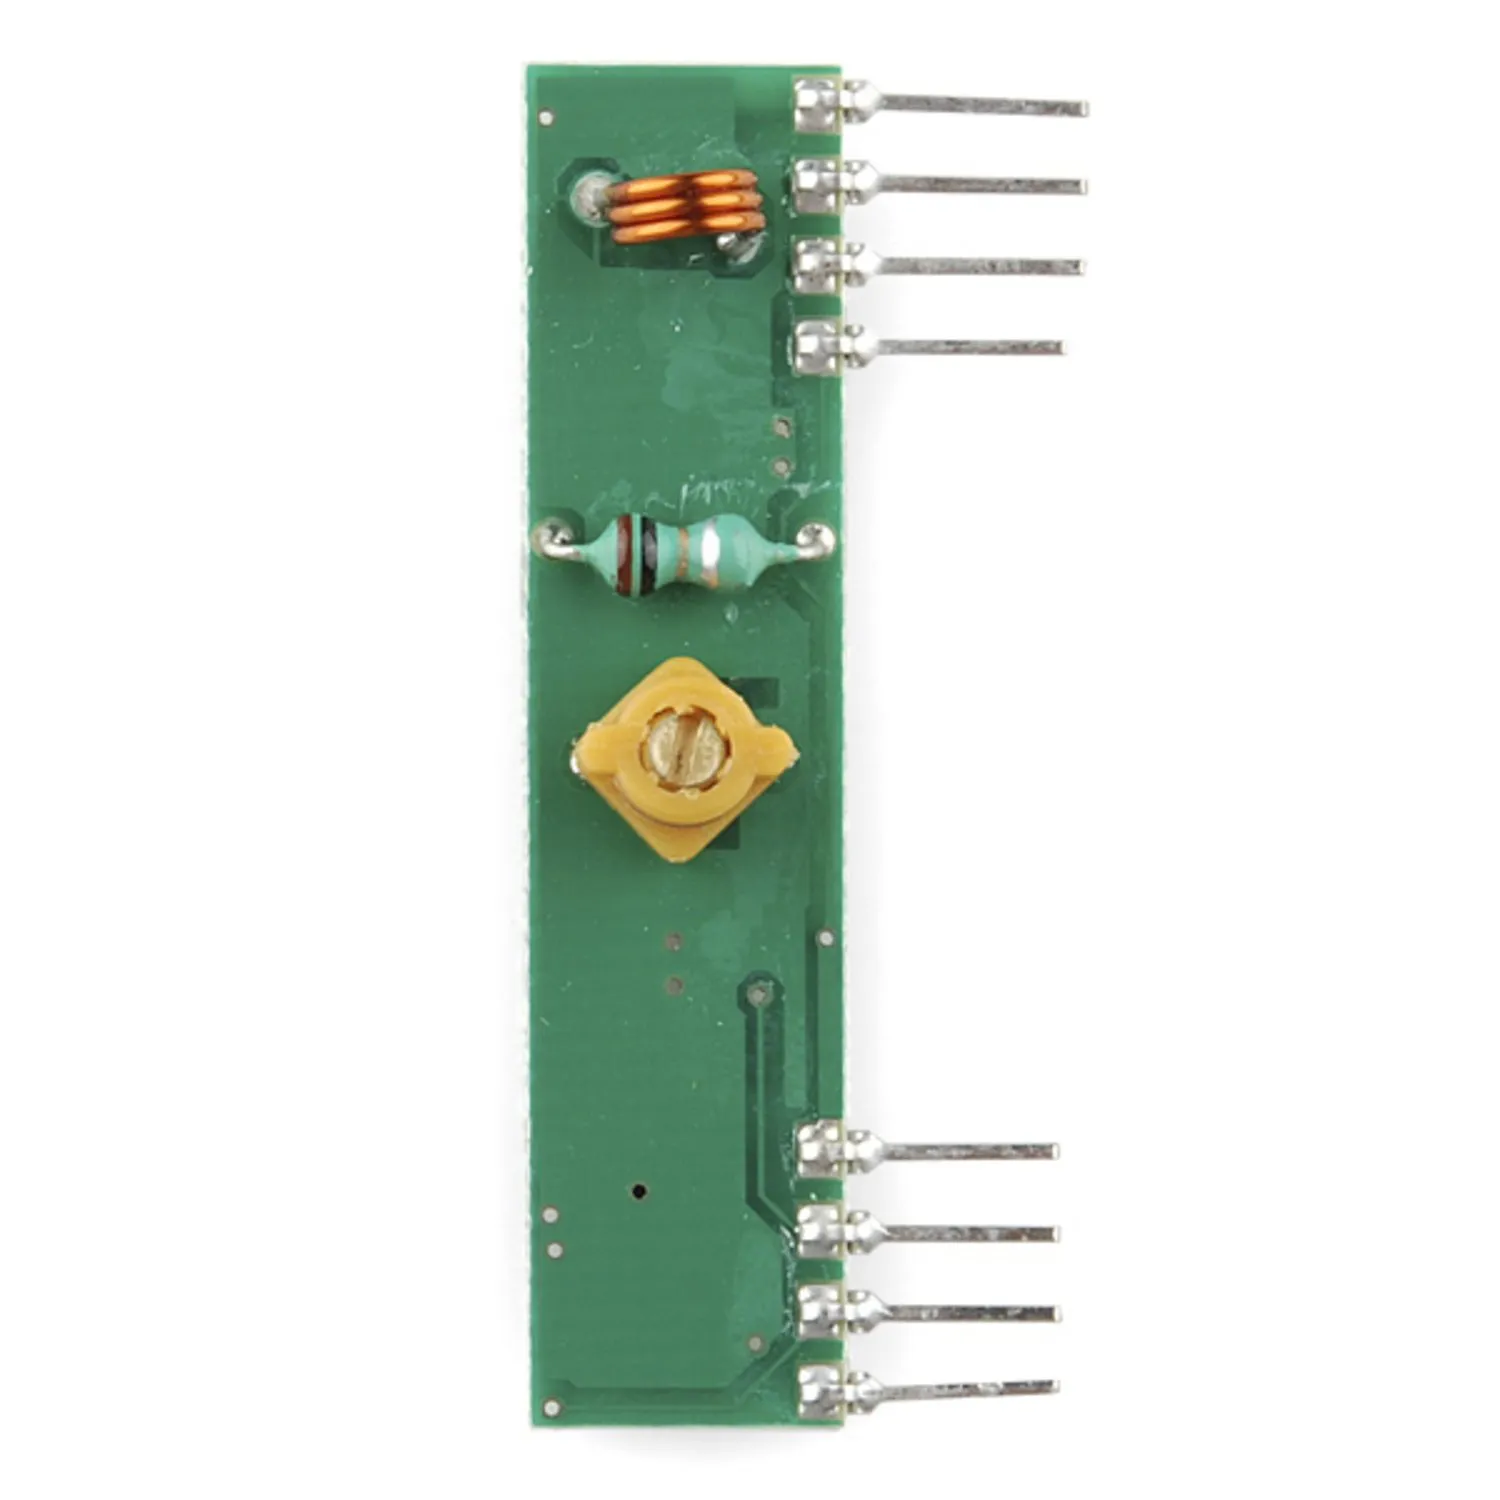 Photo of RF Link Receiver - 4800bps (434MHz)